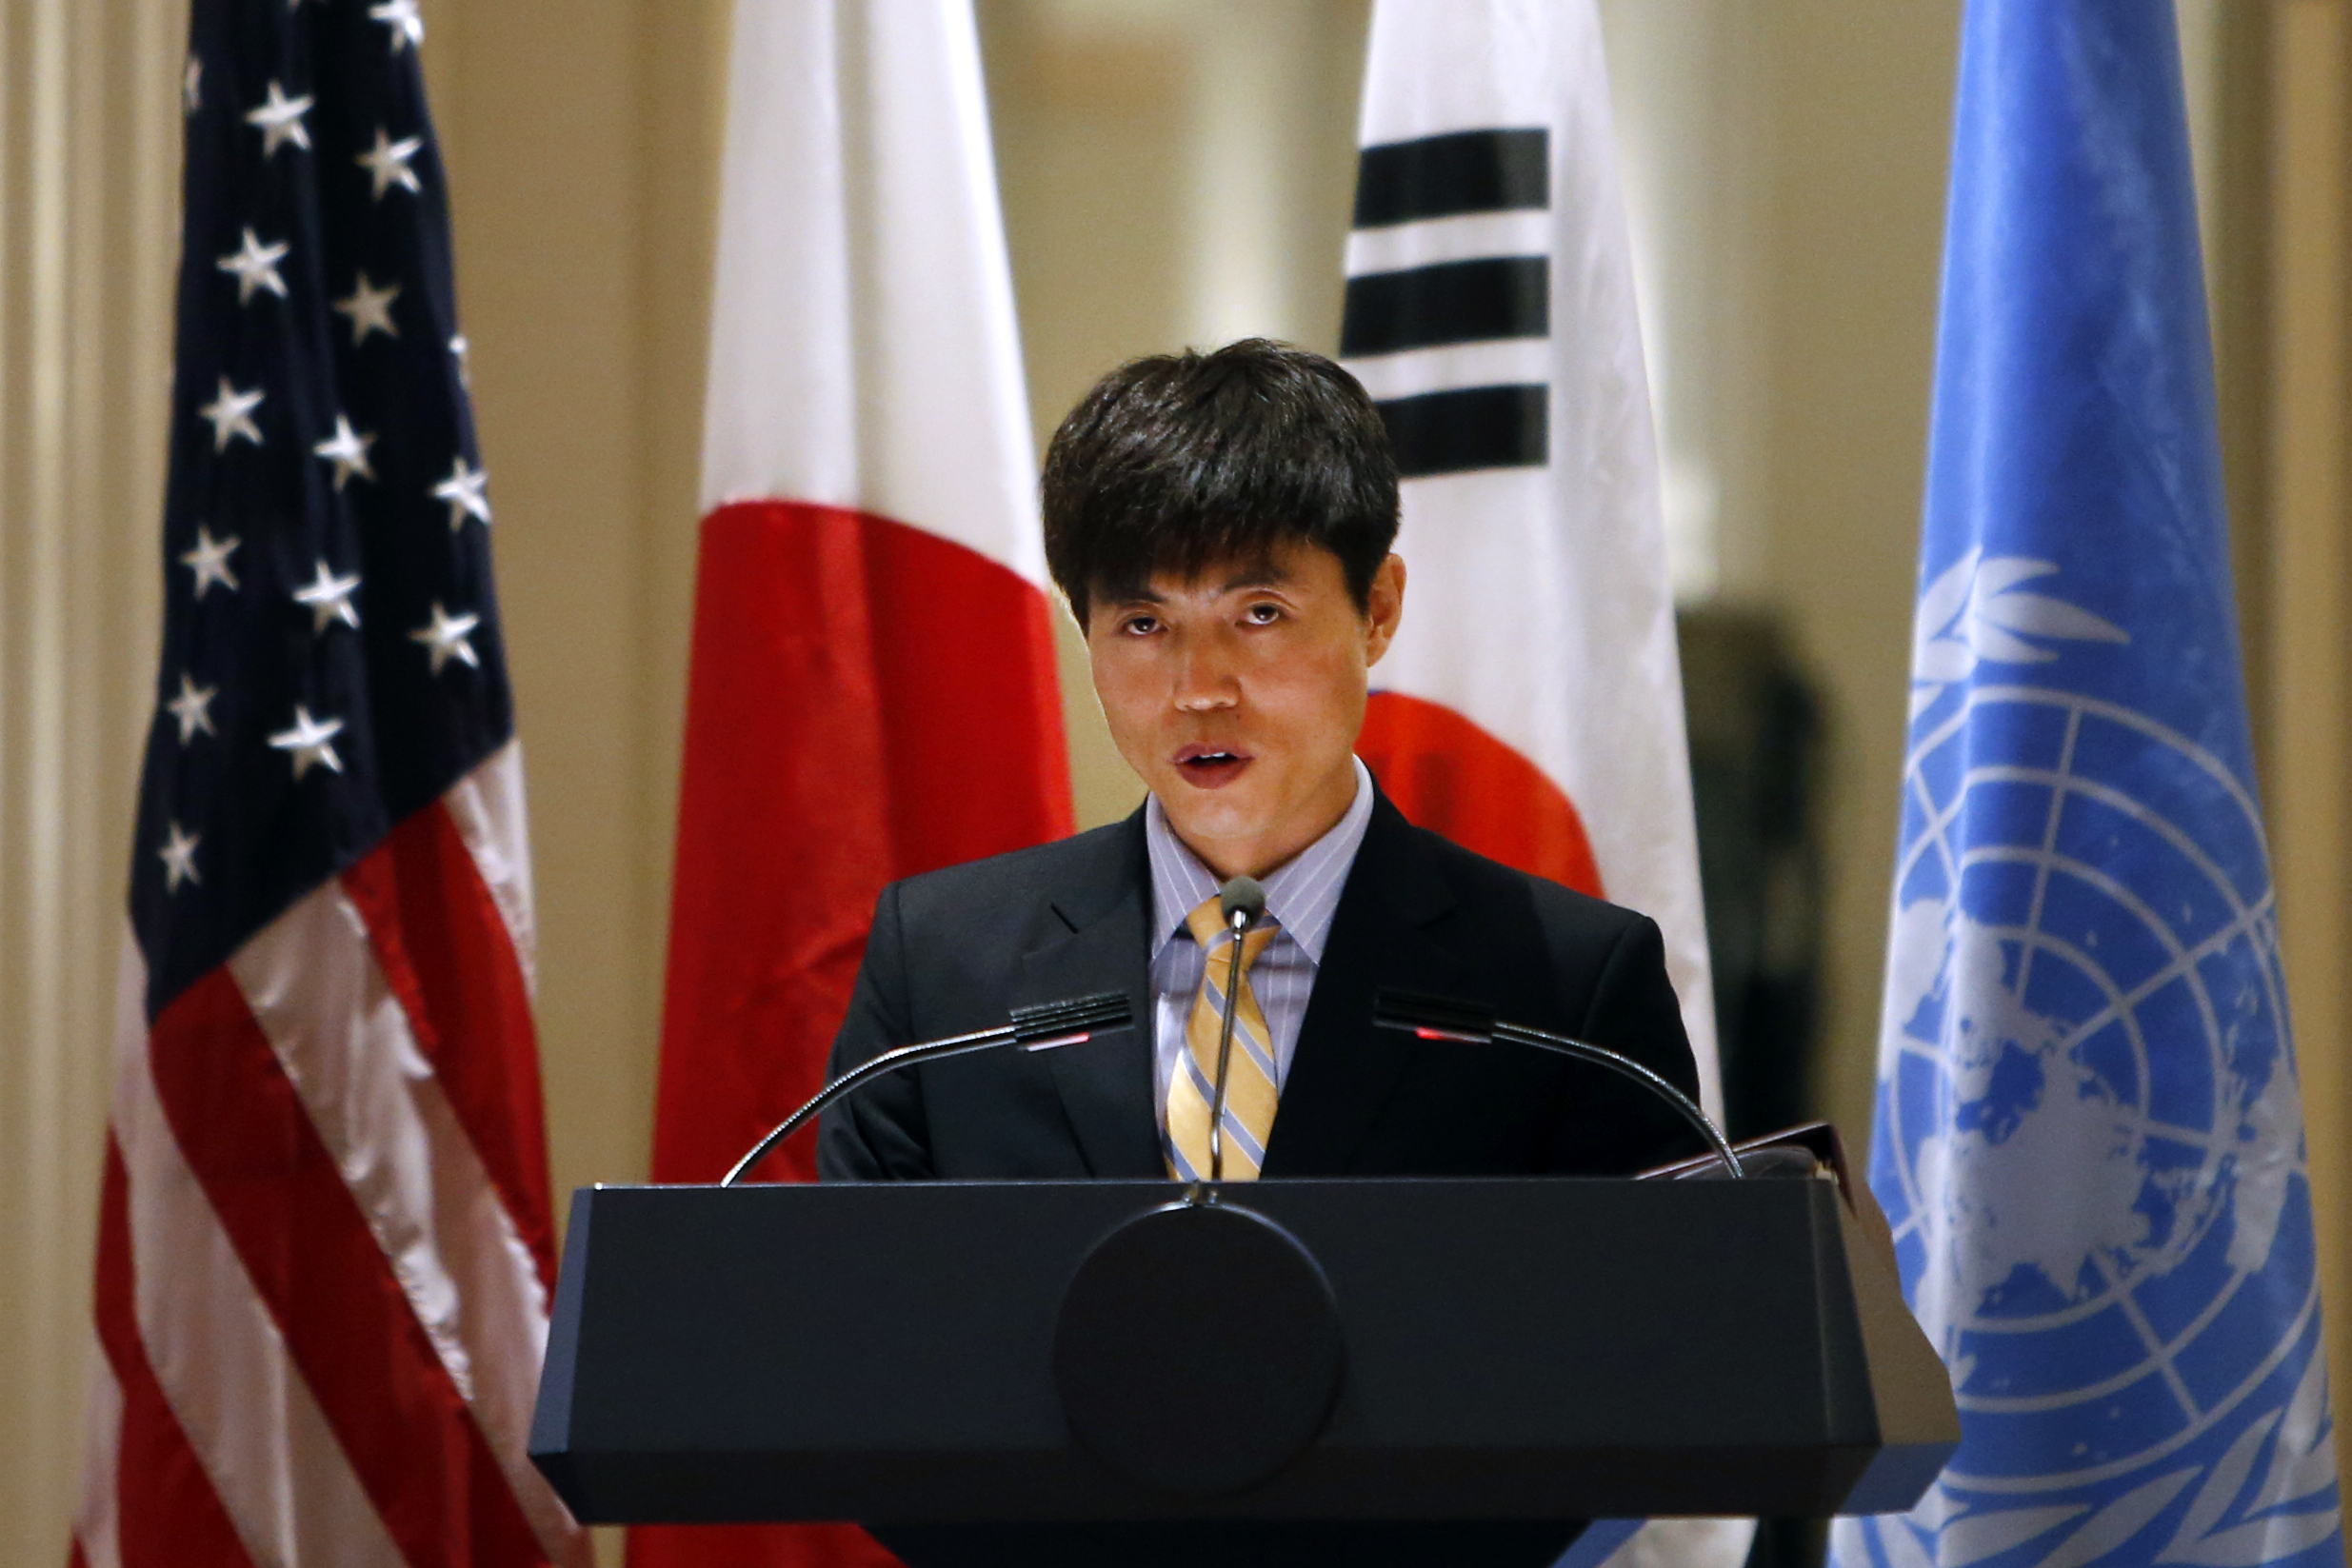 North Korean human-rights activist Shin Dong-hyuk delivers remarks during an event on human rights in North Korea at the Waldorf Astoria Hotel, in New York City, on Sept. 23, 2014 (Jason DeCrow—AP)